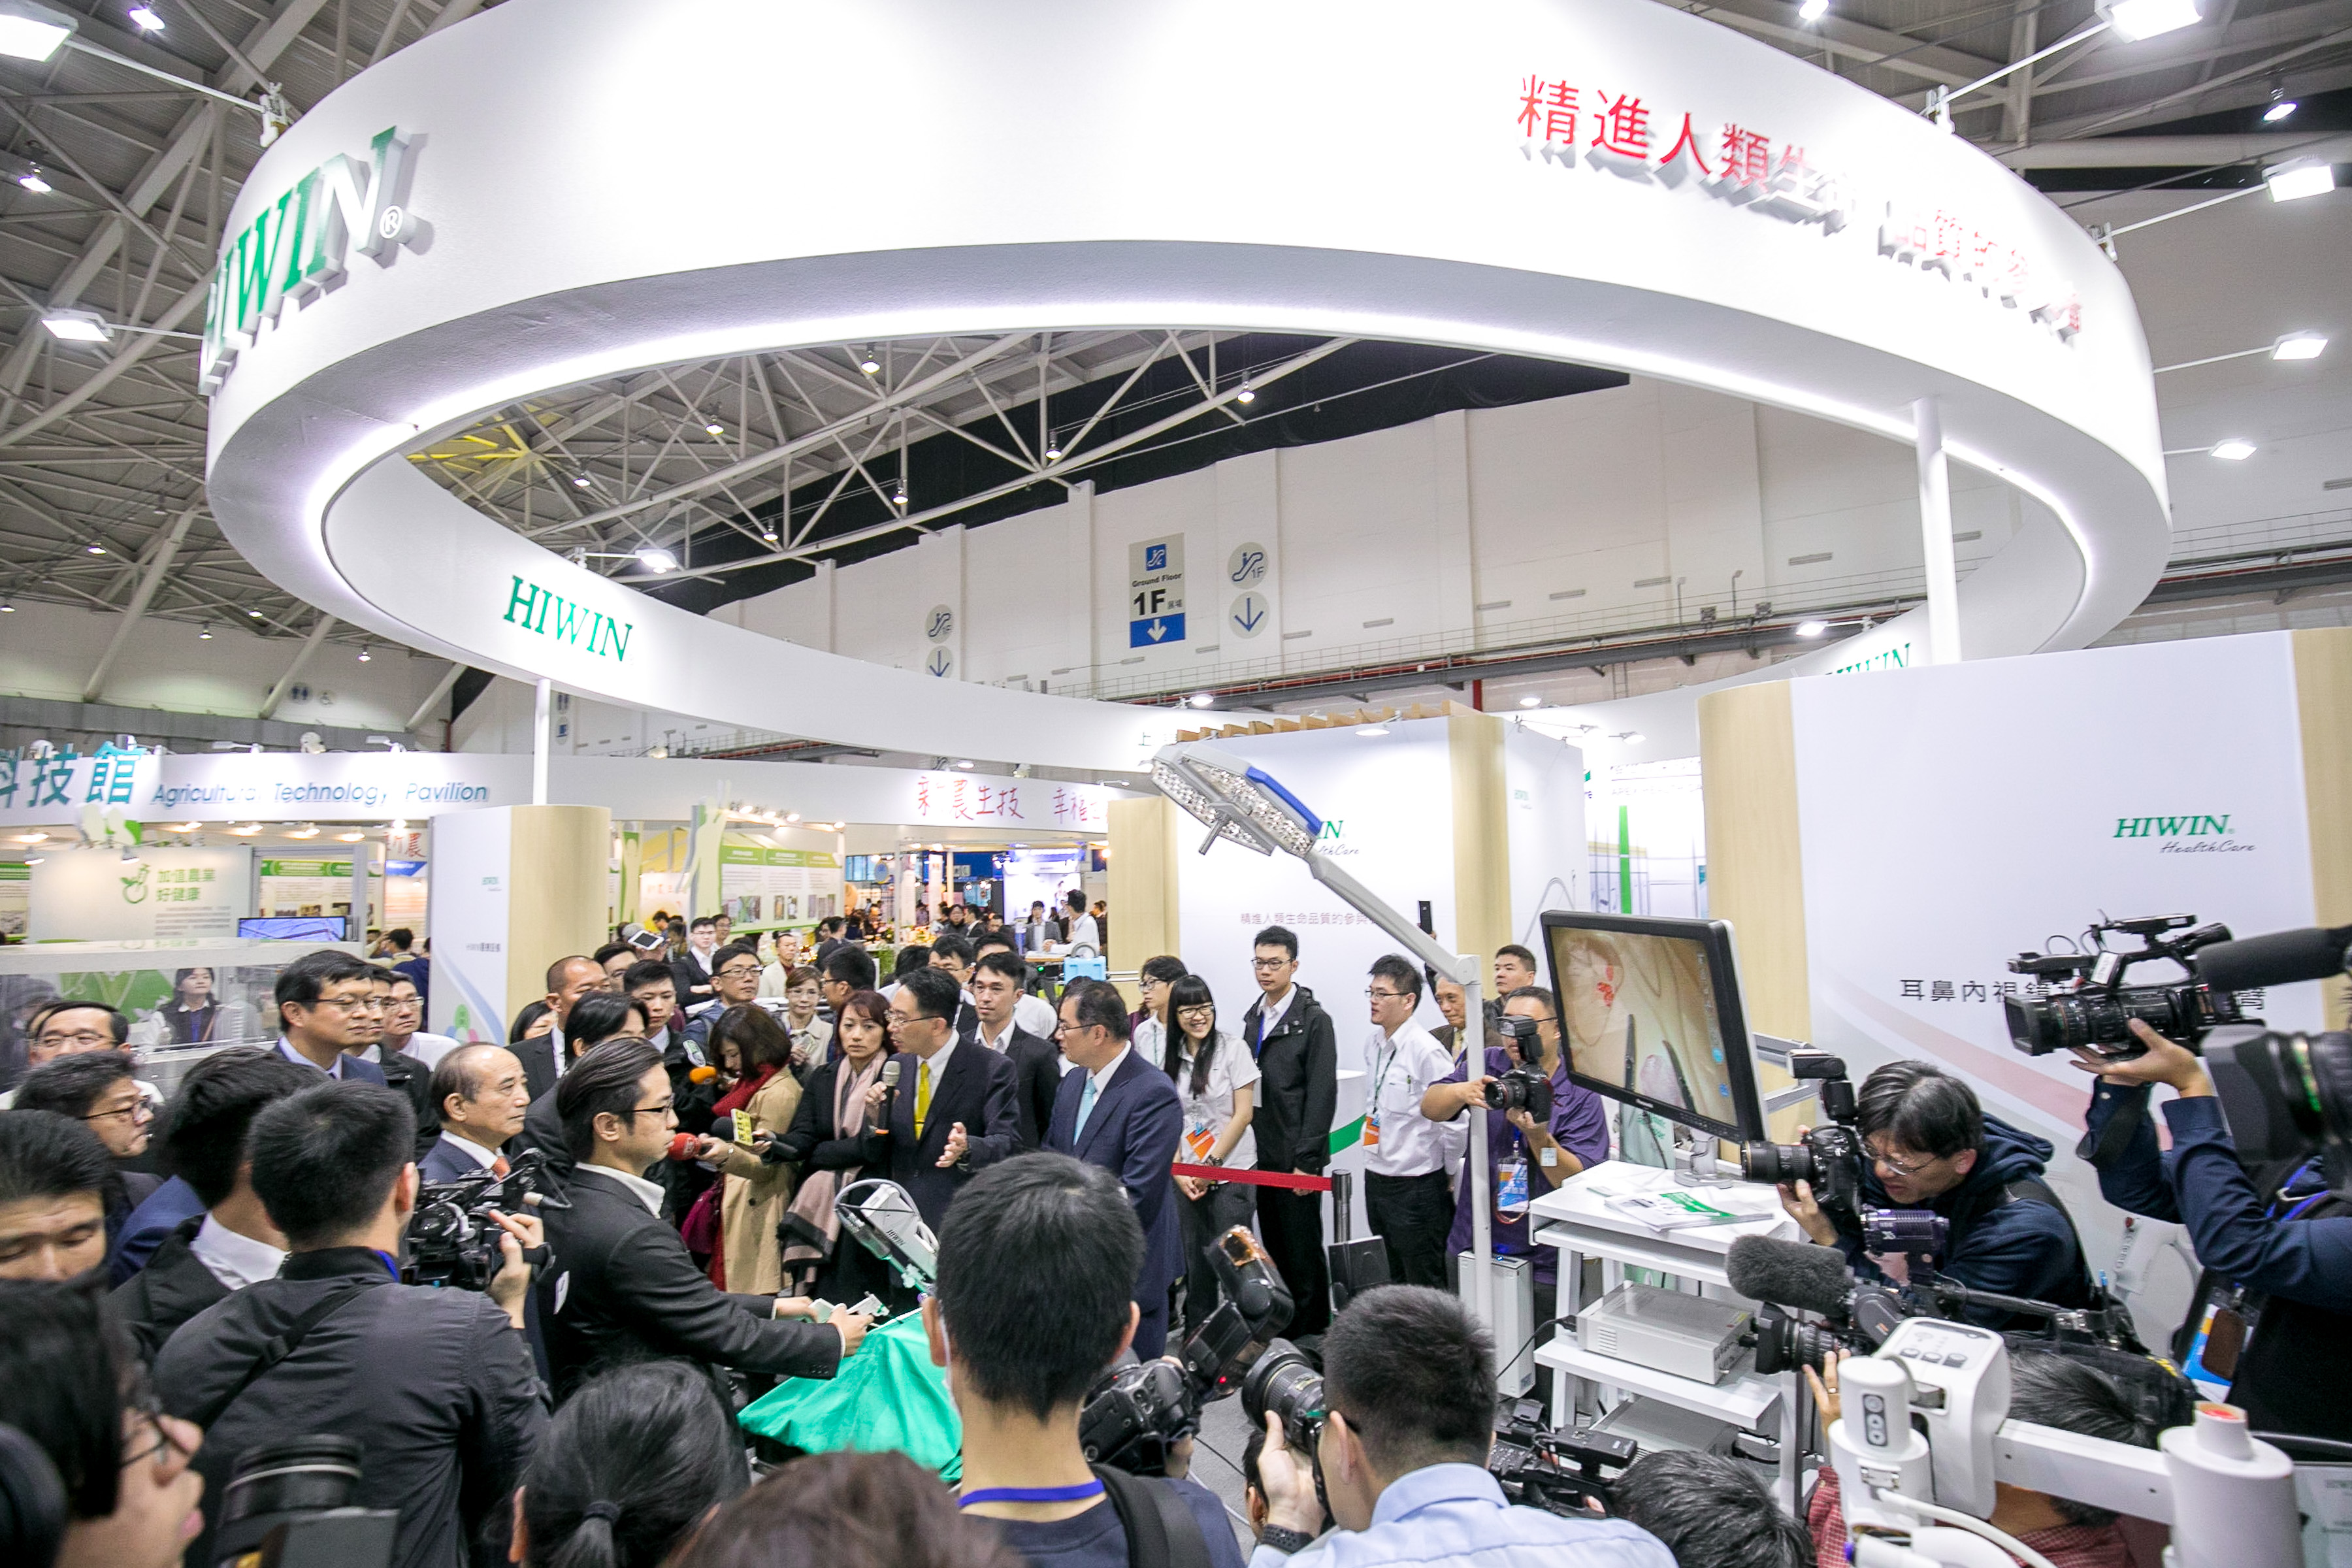 2.Efficient, Smart and Innovative Healthcare Expo at Taiwan.jpg